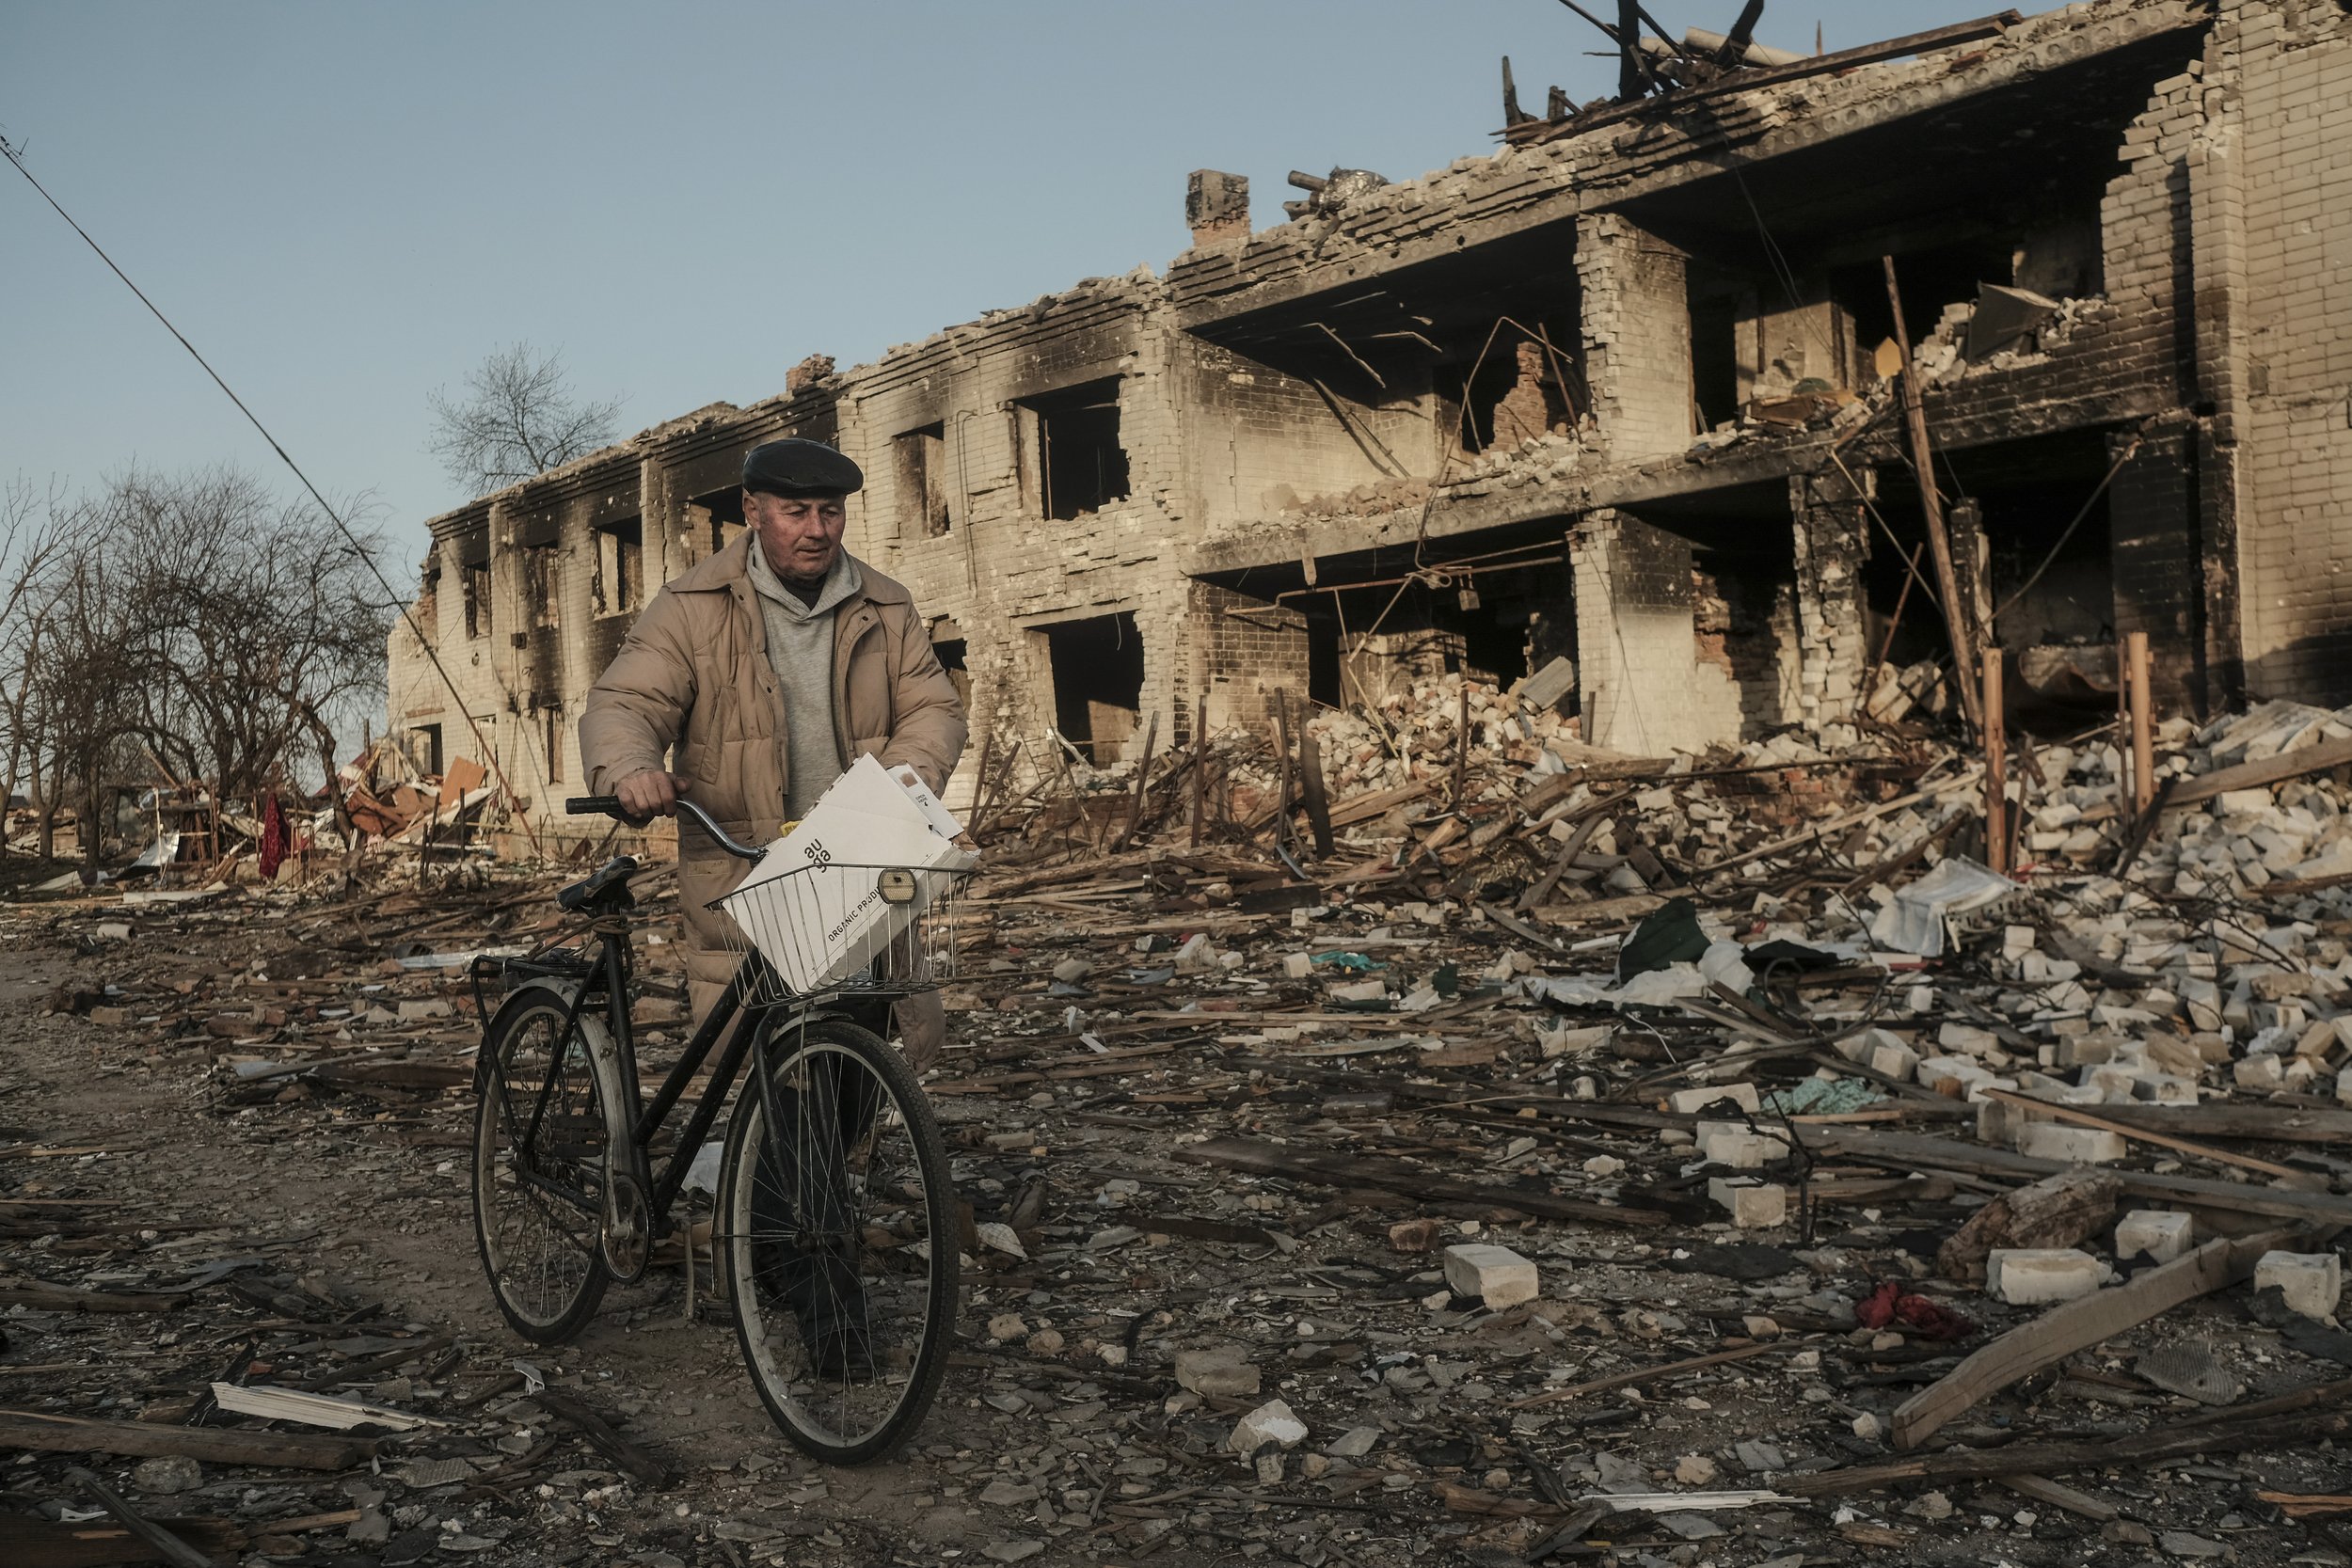  A man walks his bike through a destroyed neighborhood in Chernihiv, Ukraine on April 14, 2022. Chernihiv, a city in northeast Ukraine saw massive destruction amid heavy fighting leaving the city without electricity or access to basic necessities. 